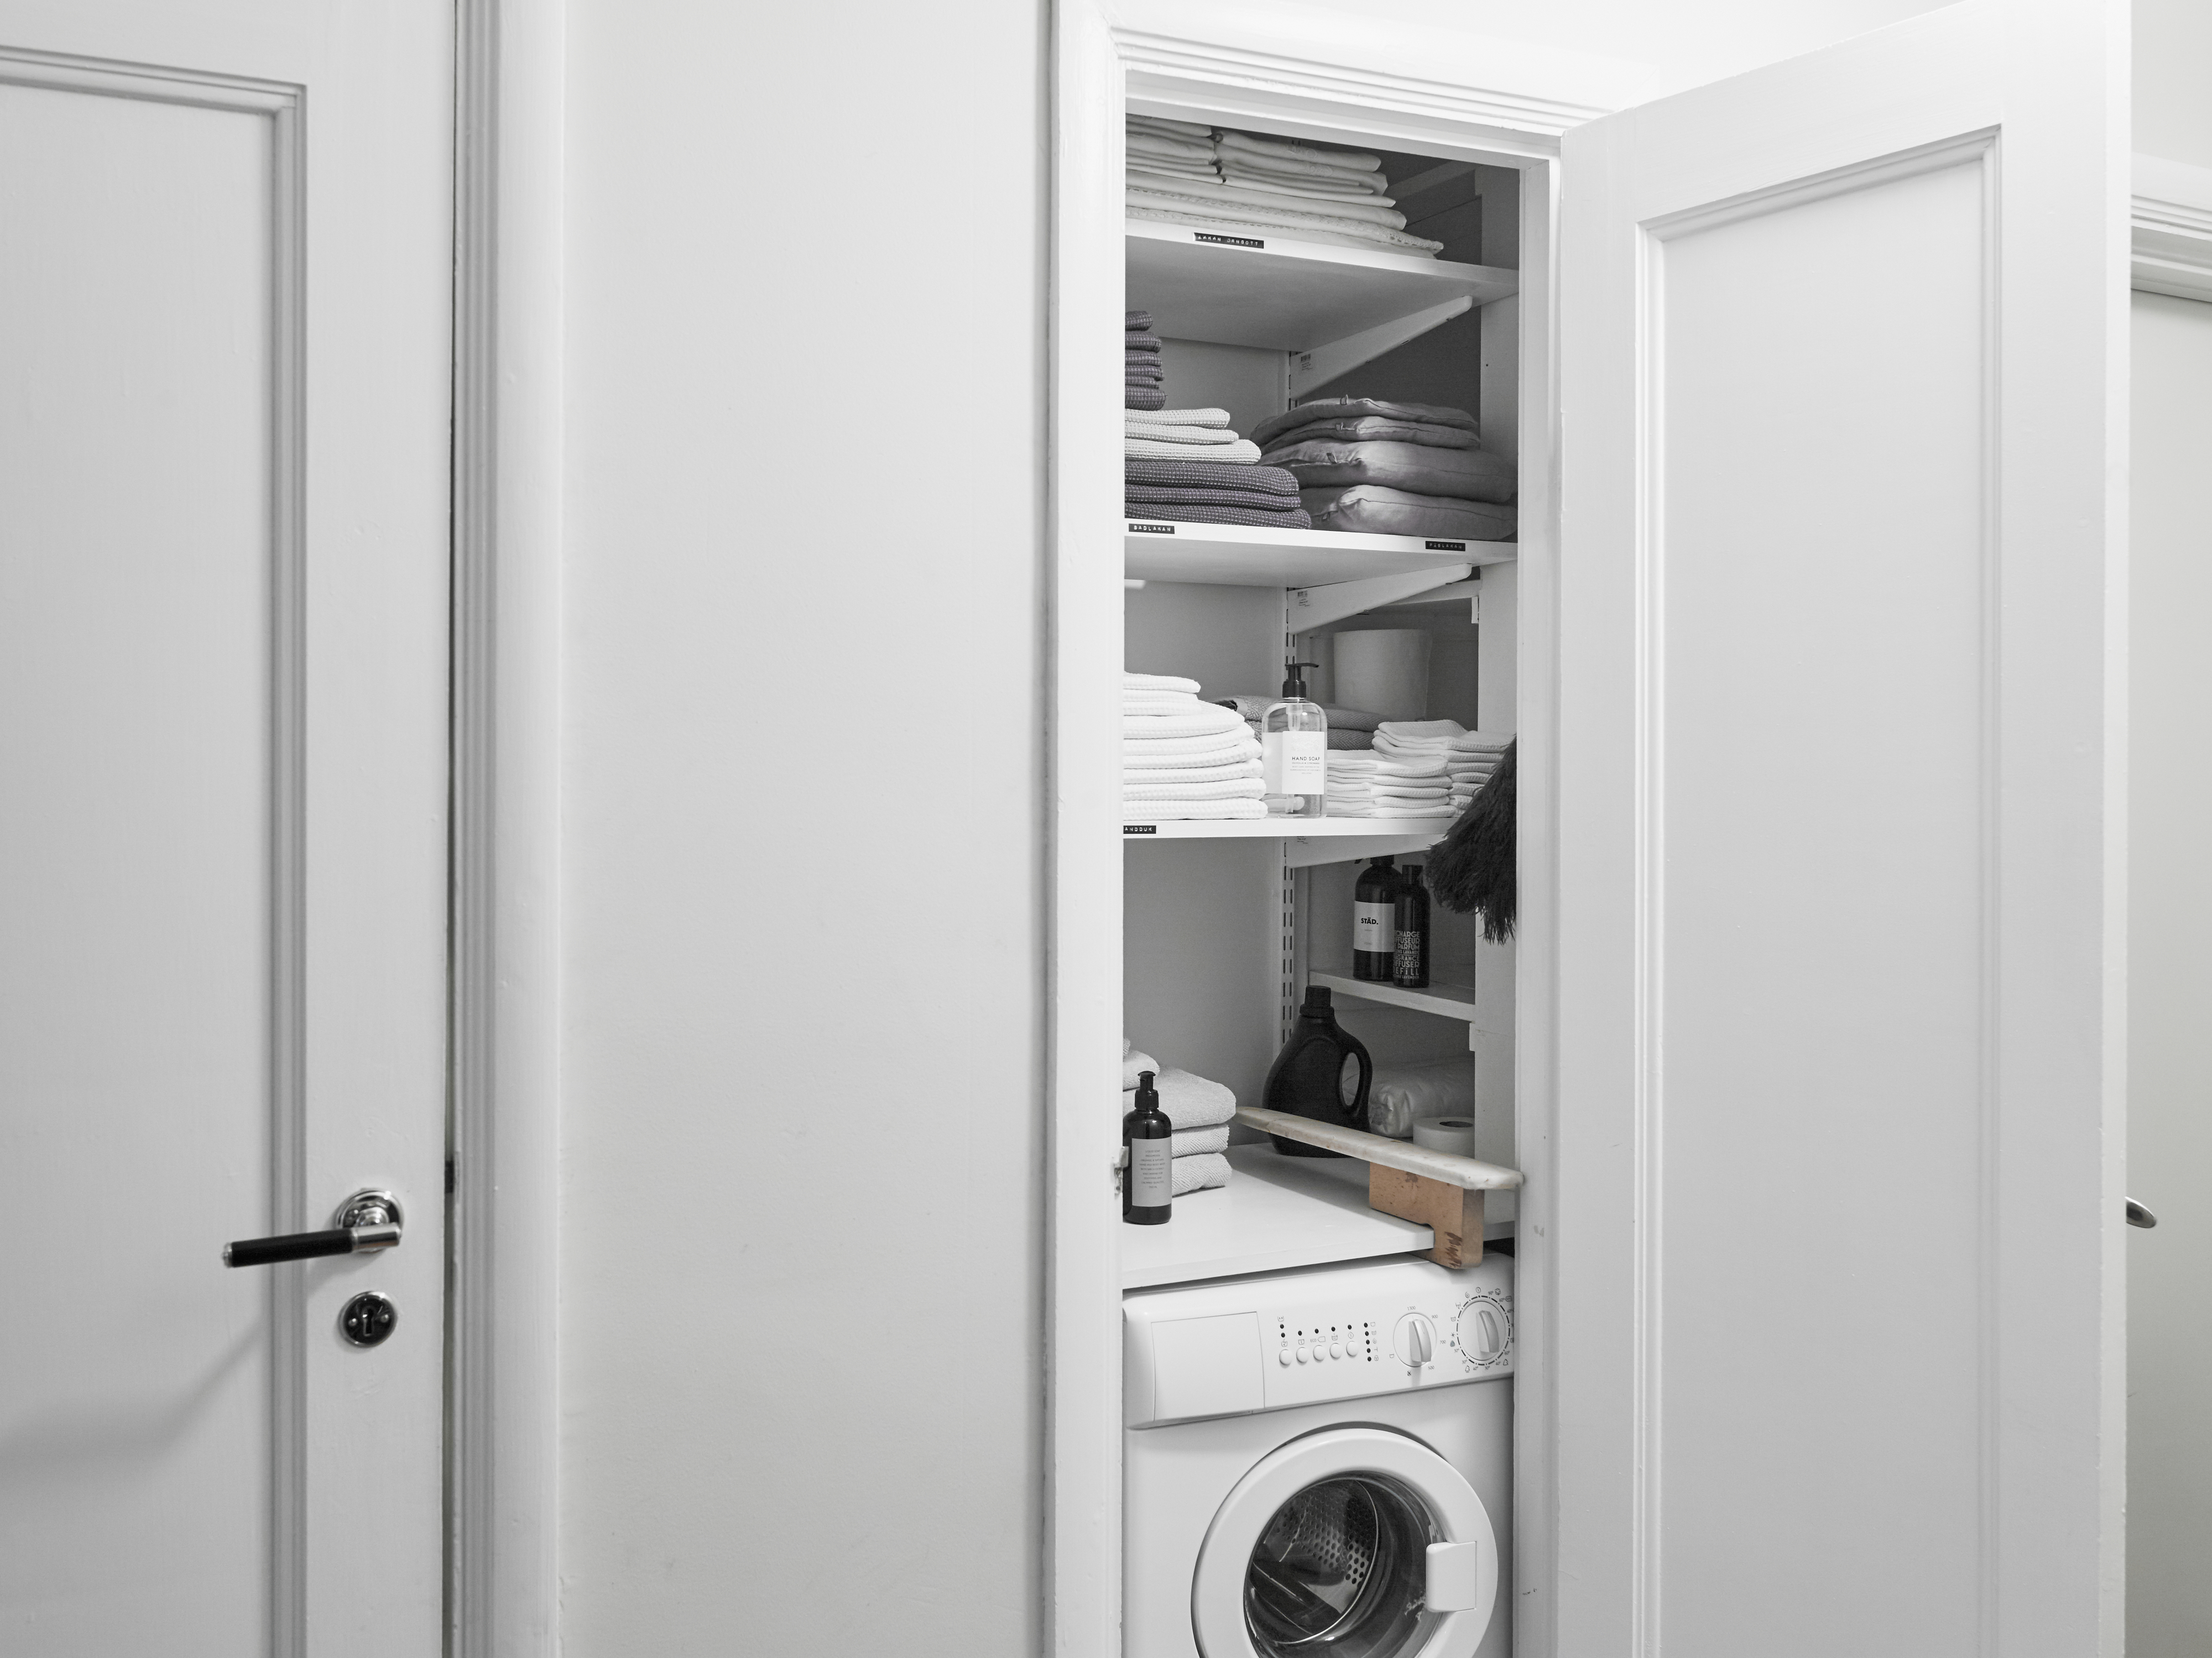 An open linen closet with neatly stacked towels and sheets above a washer